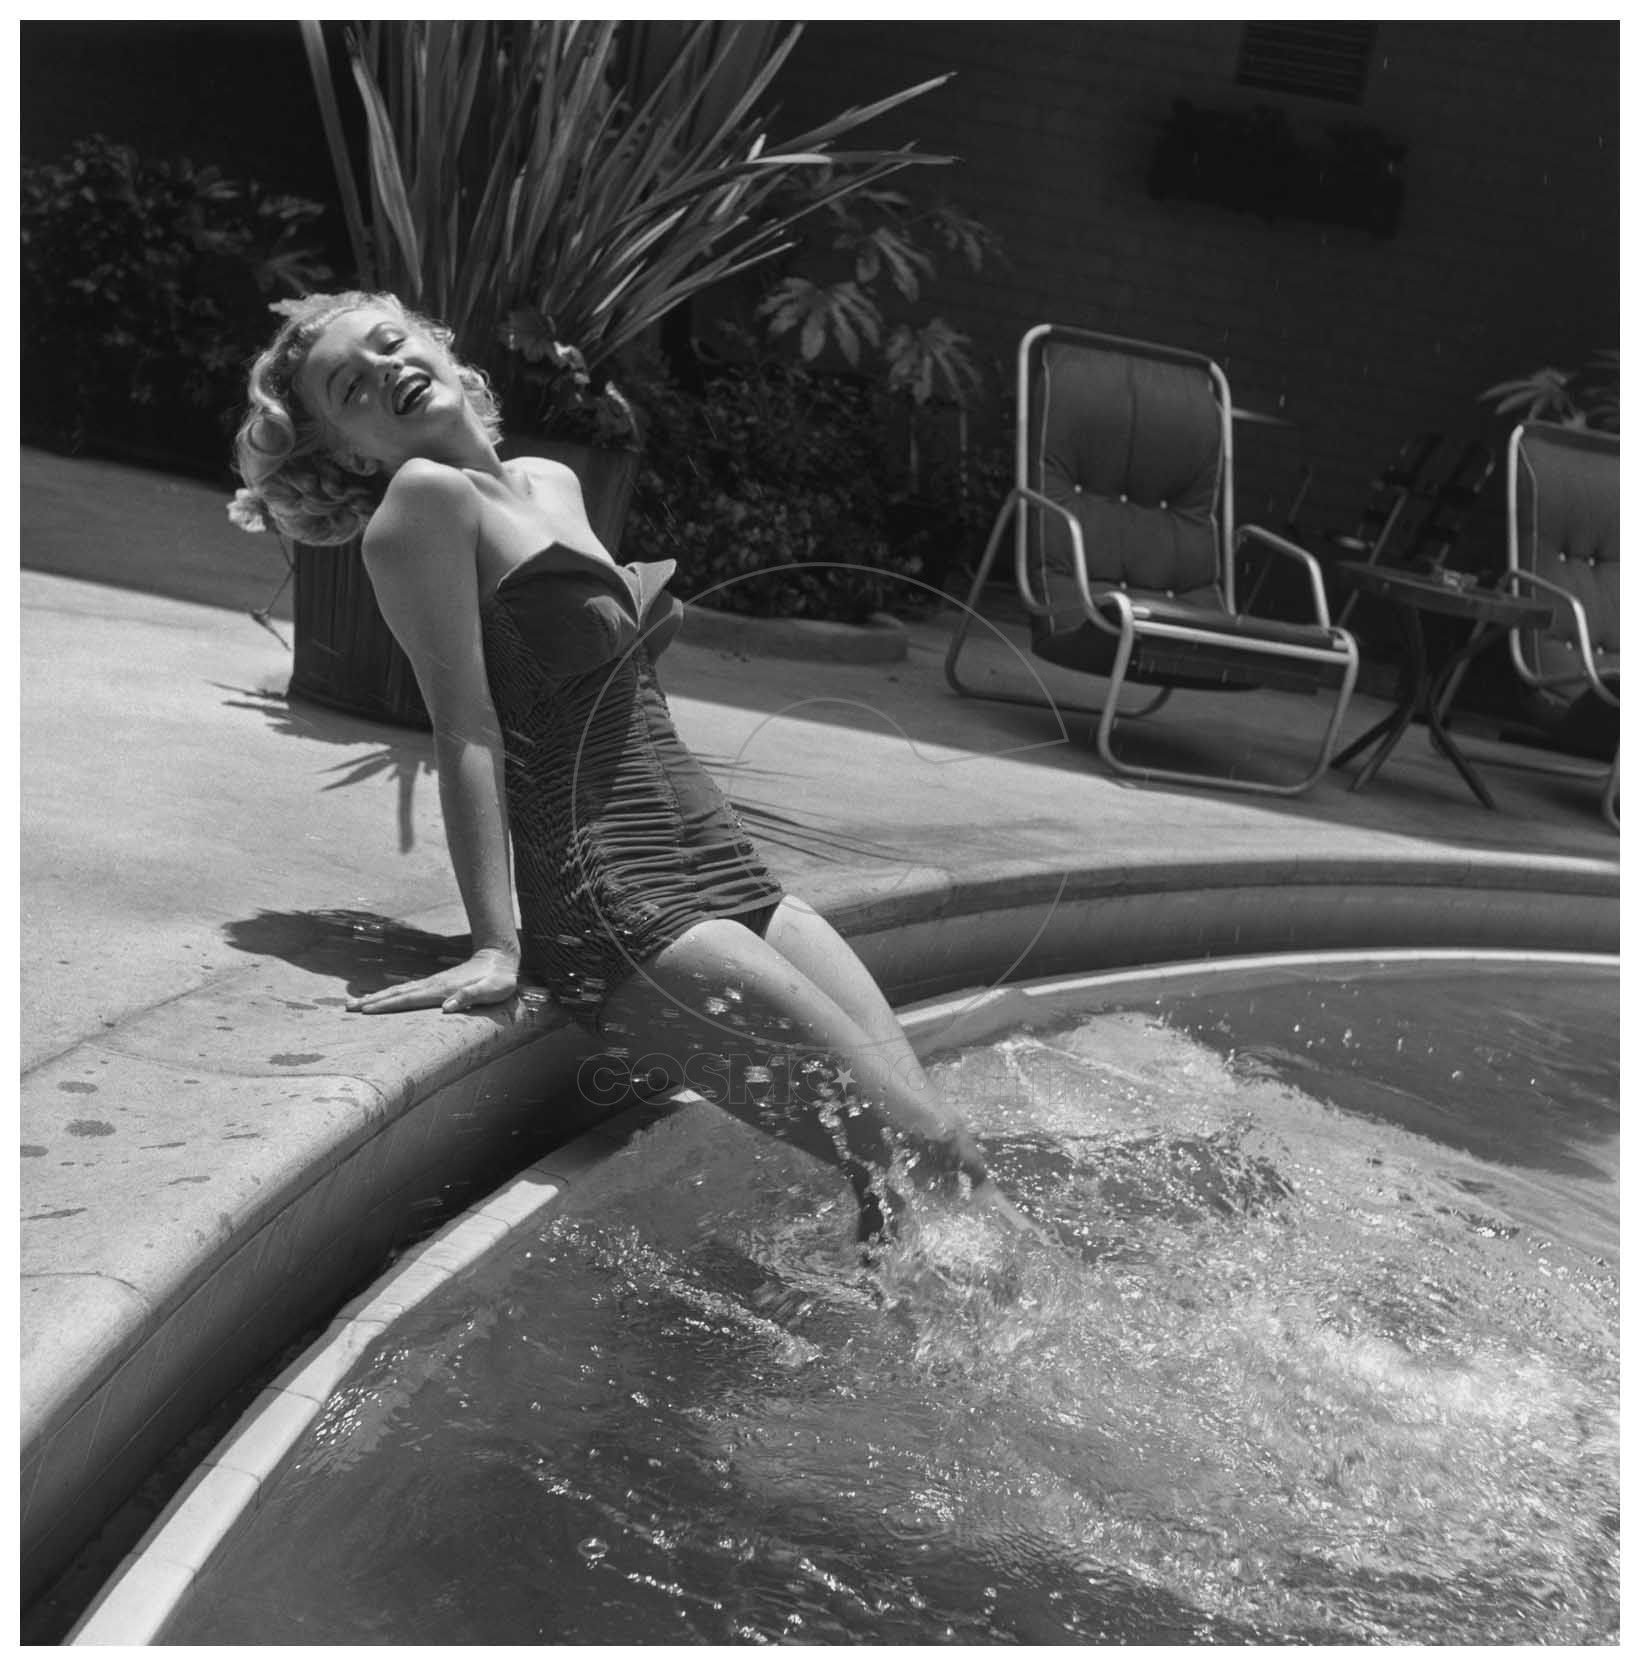 marilyn-monroe-1926-1962-wearing-a-bathing-suit-and-with-her-legs-in-a-swimming-pool-circa-1951-photo-by-archive-photos-getty-images-1951